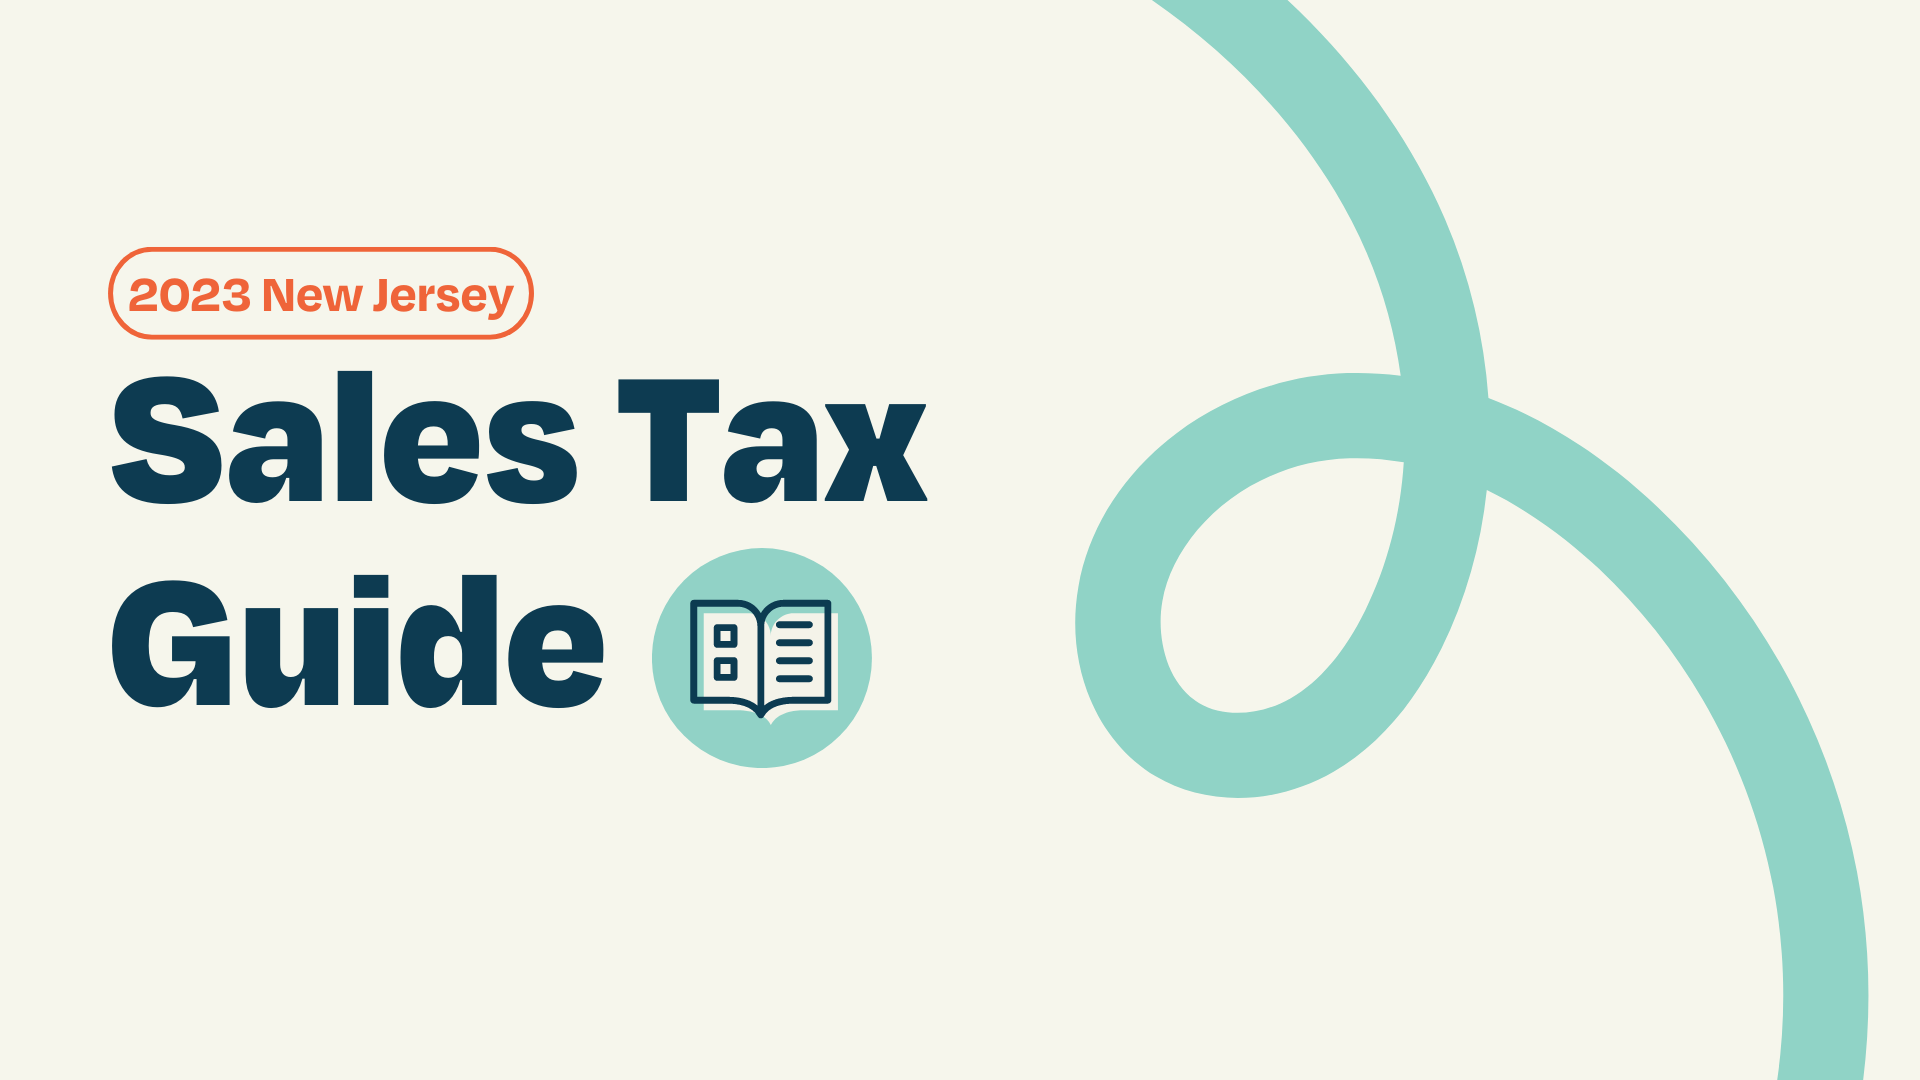 New Jersey 2023 Sales Tax Guide